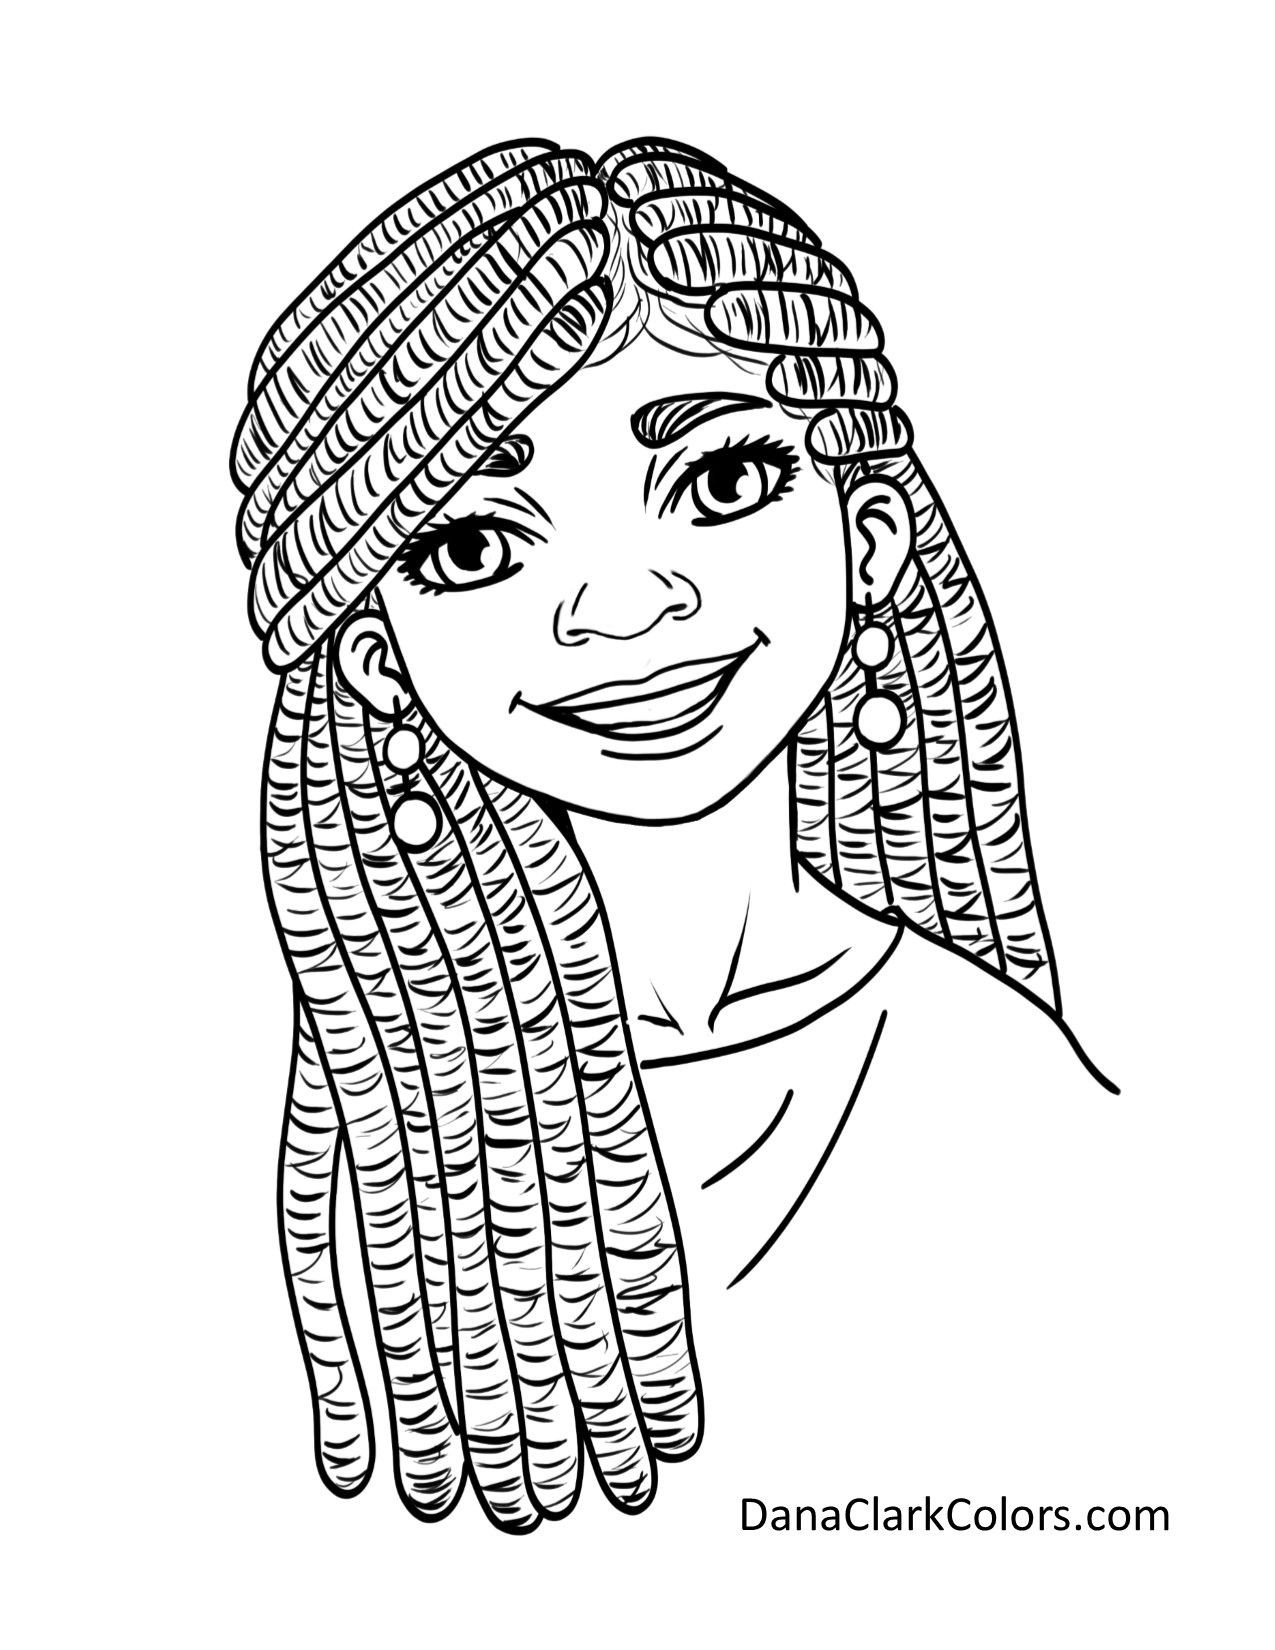 Coloring Pages For Black Girls
 Black Kids coloring page AfricanAmericanColoringPage